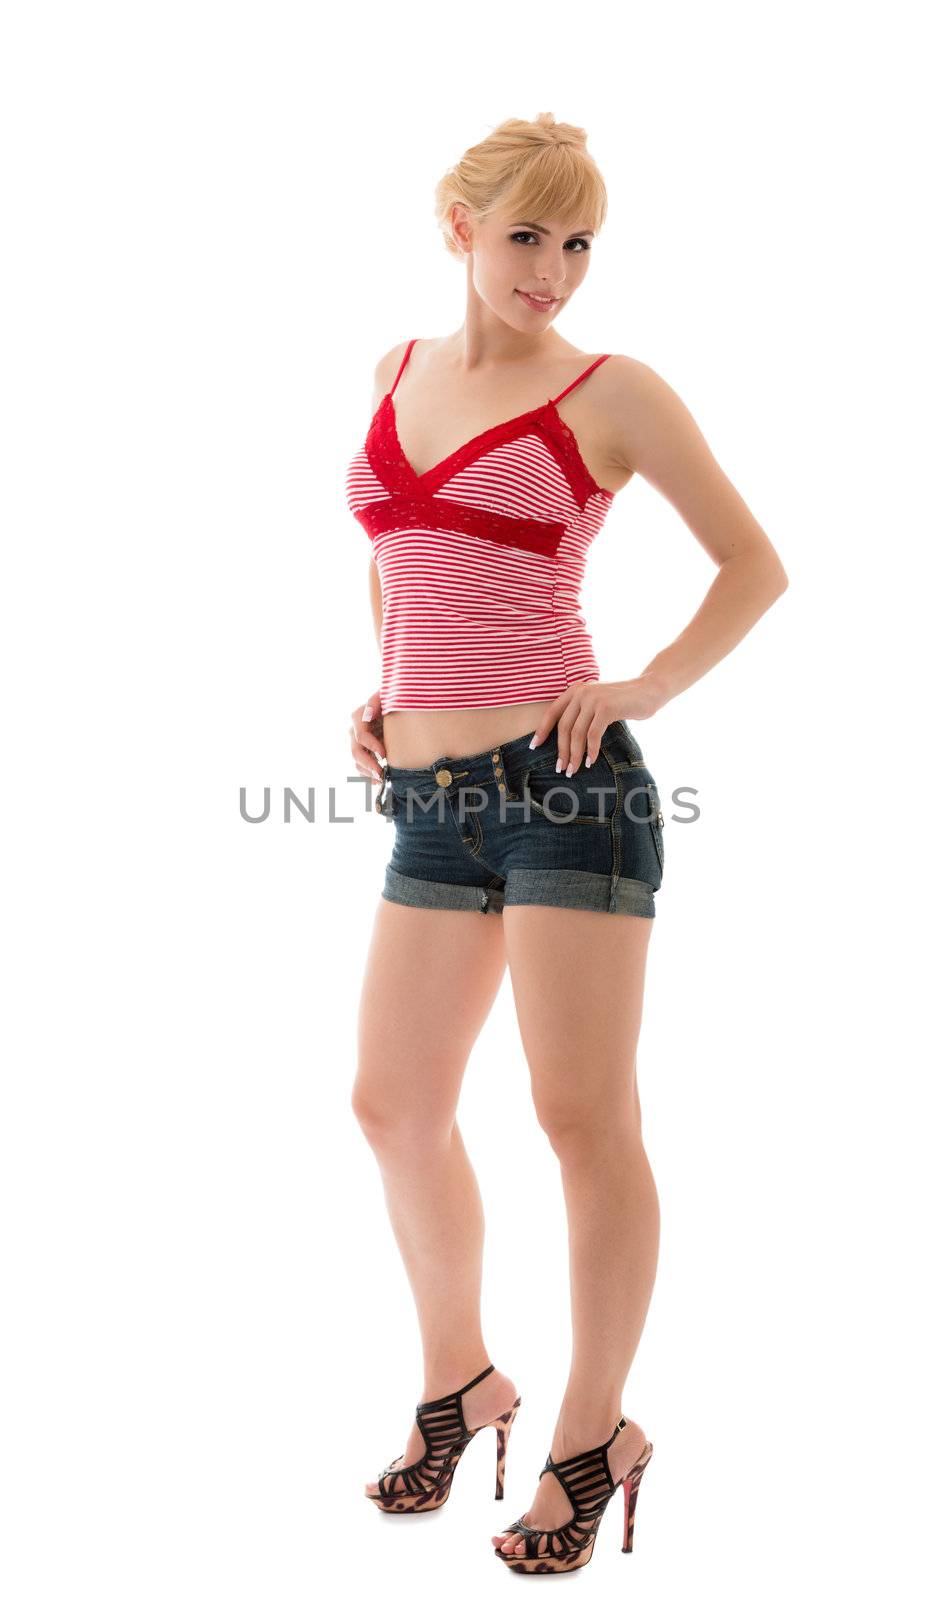 Sexual girl in jeans shorts and red top by iryna_rasko